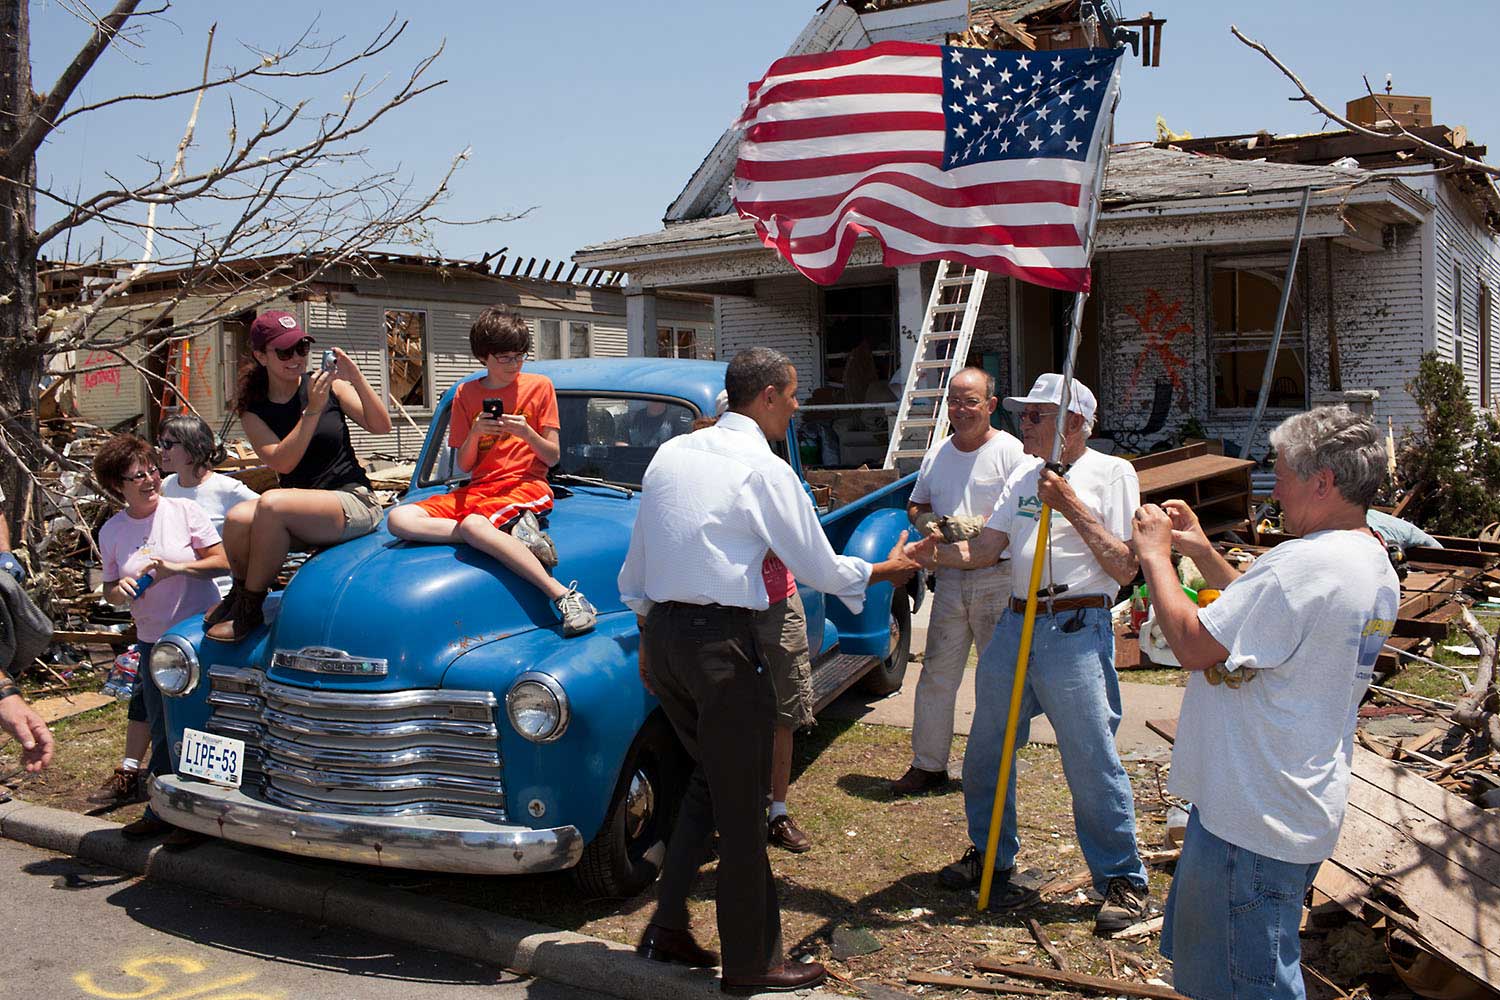 The President visits Joplin, Mo., on May 29, 2011, following a devastating tornado. Here he greets Hugh Hills, 85, in front of his home. Hills told the President he hid in a closet during the tornado, which destroyed the second floor and half the first floor of his house.